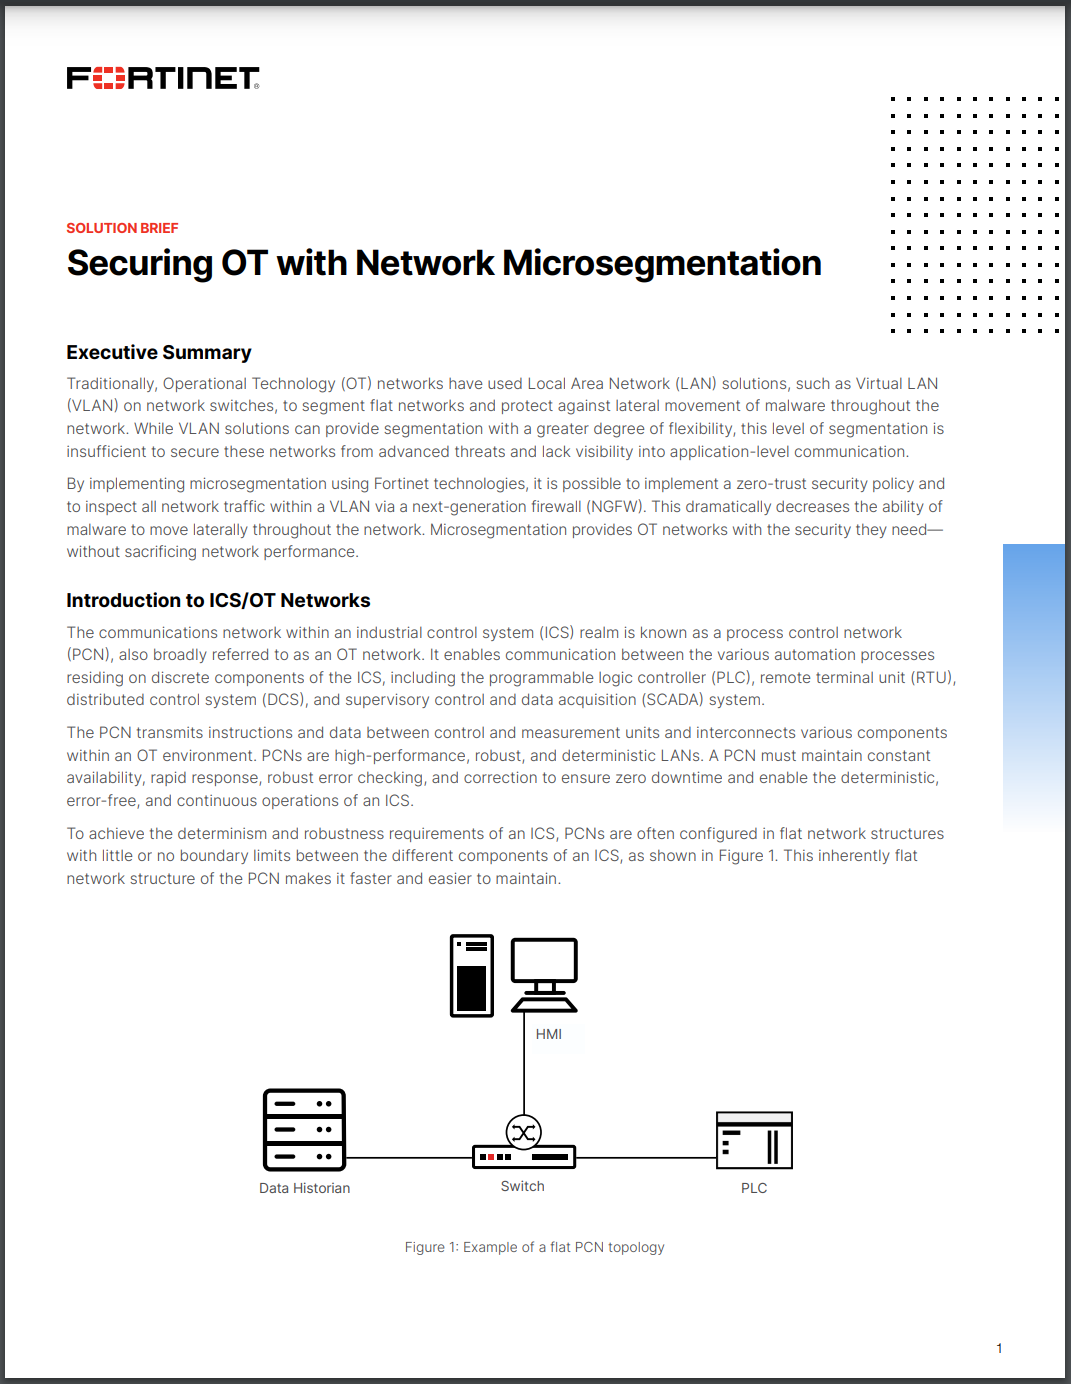 SB-Securing OT with Network Microsegmentation (sold in package, 10pc per package)